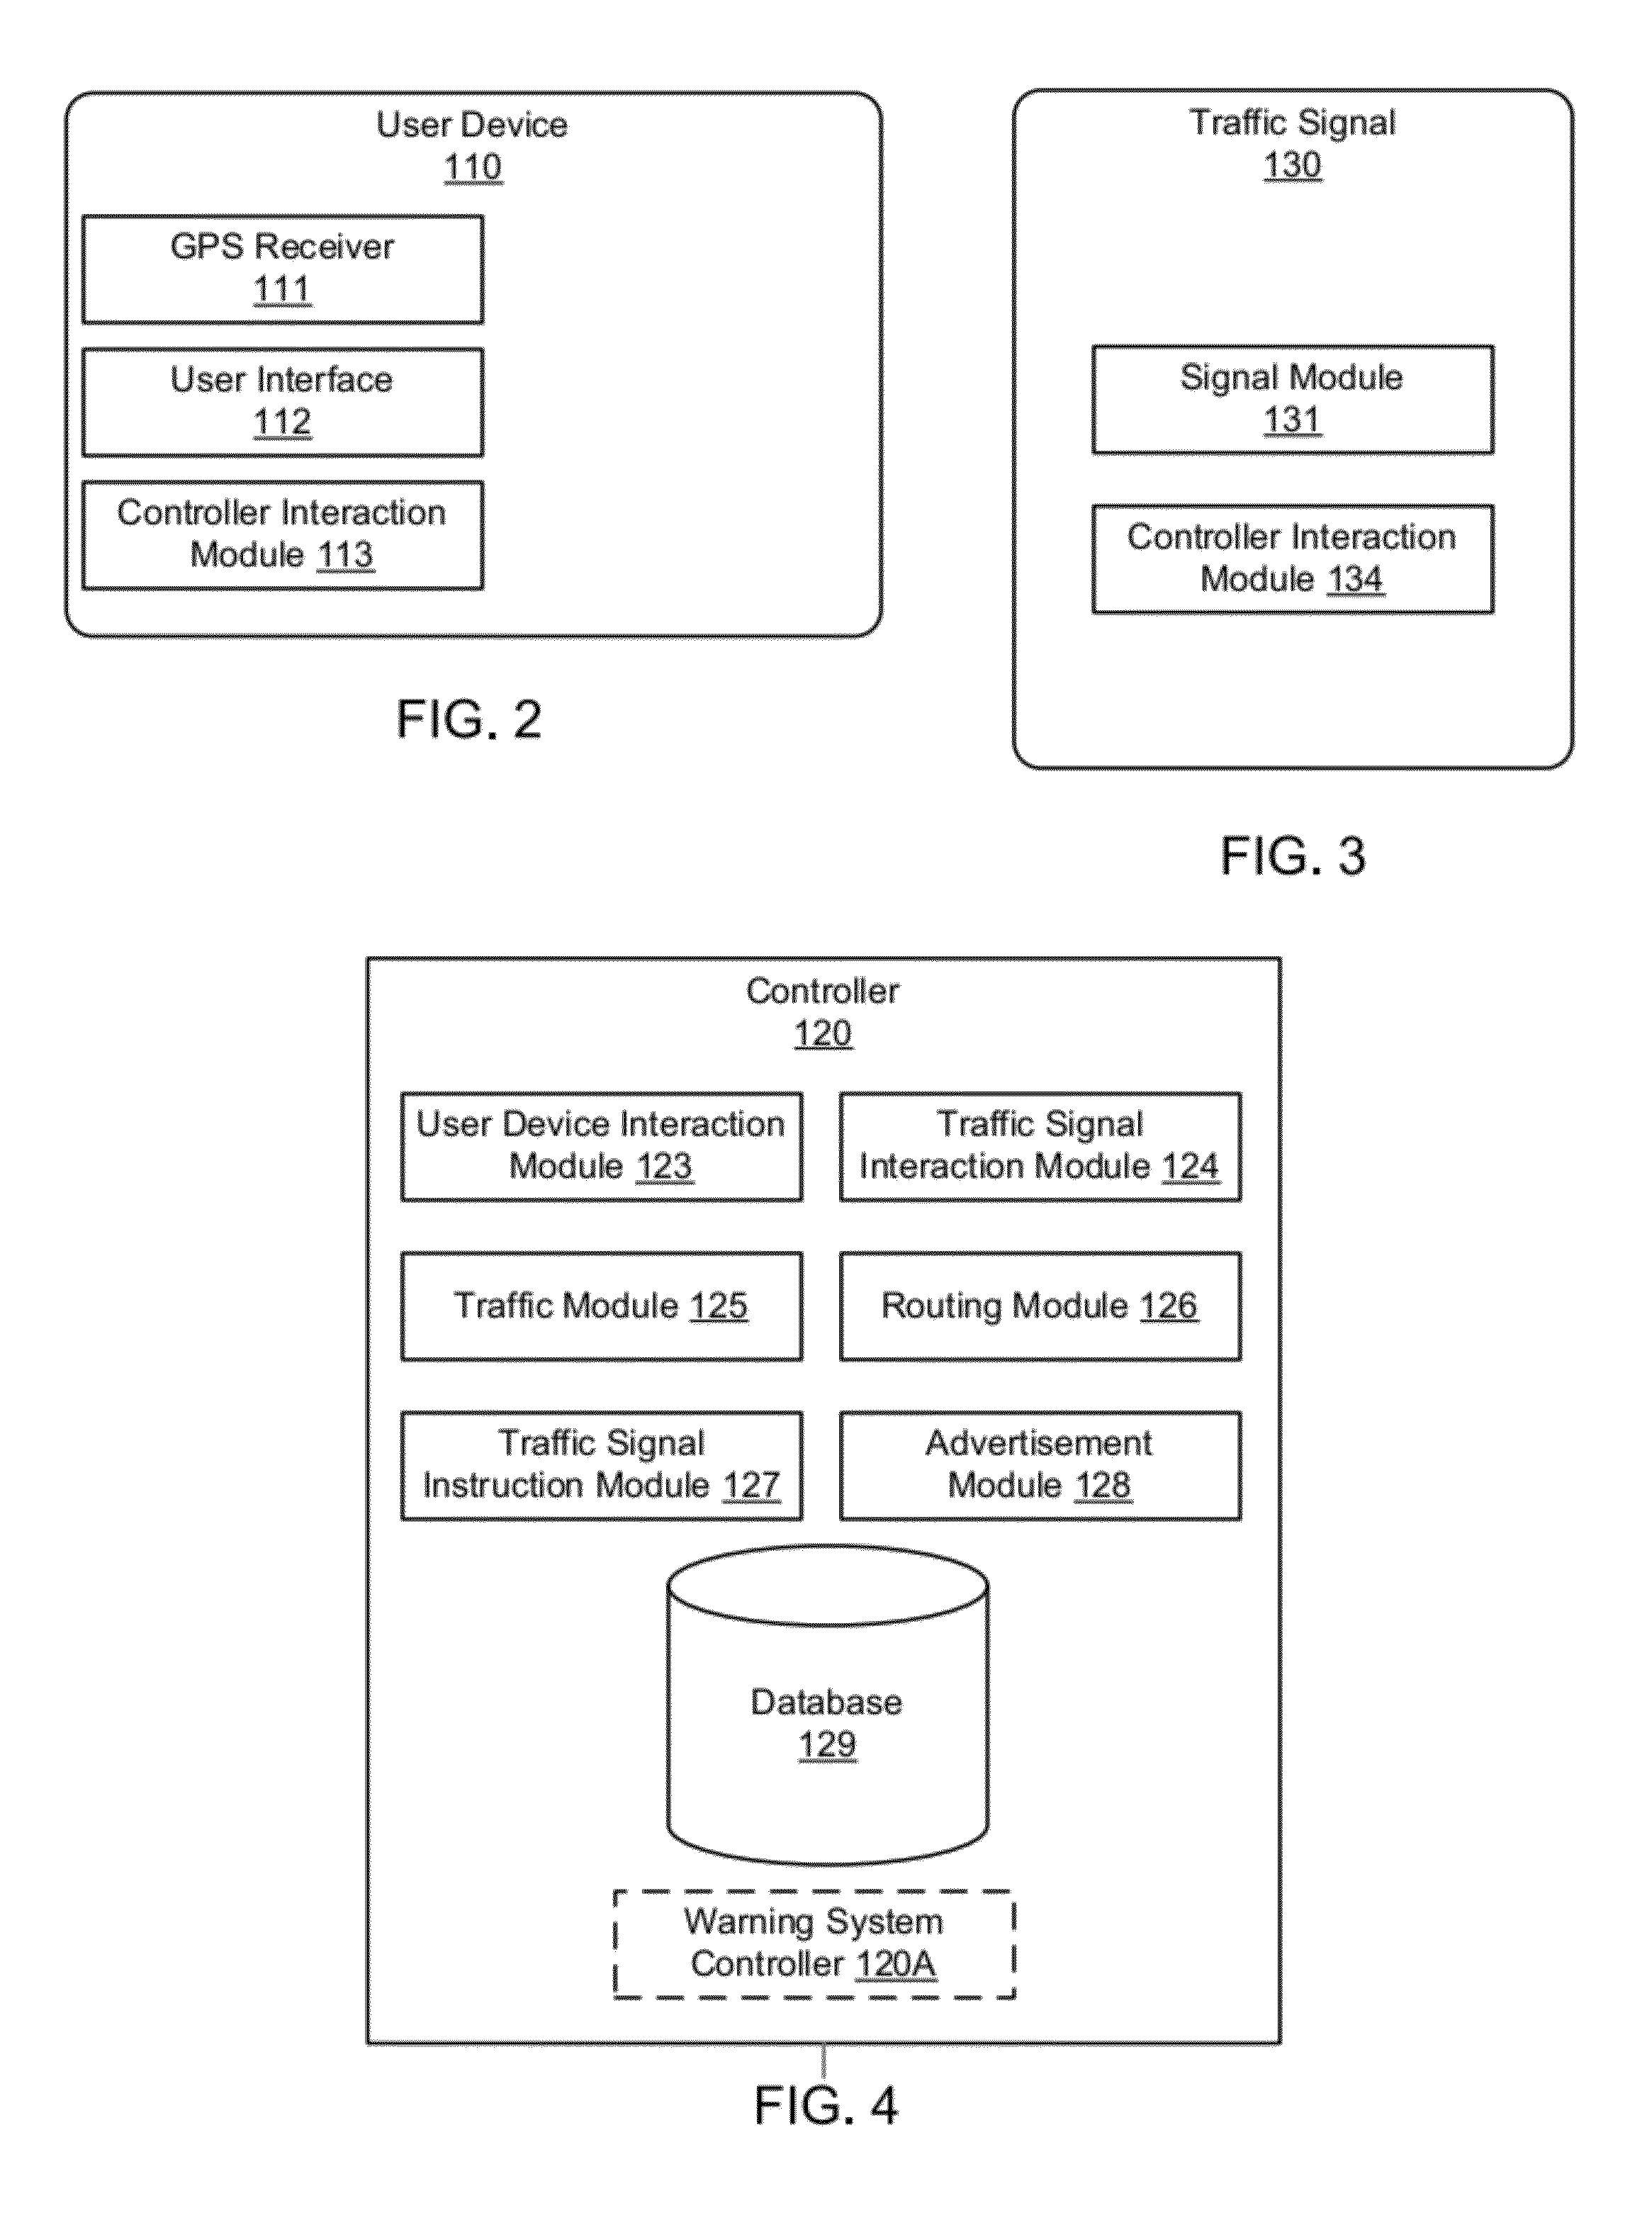 Driver Safety Enhancement Using Intelligent Traffic Signals and GPS